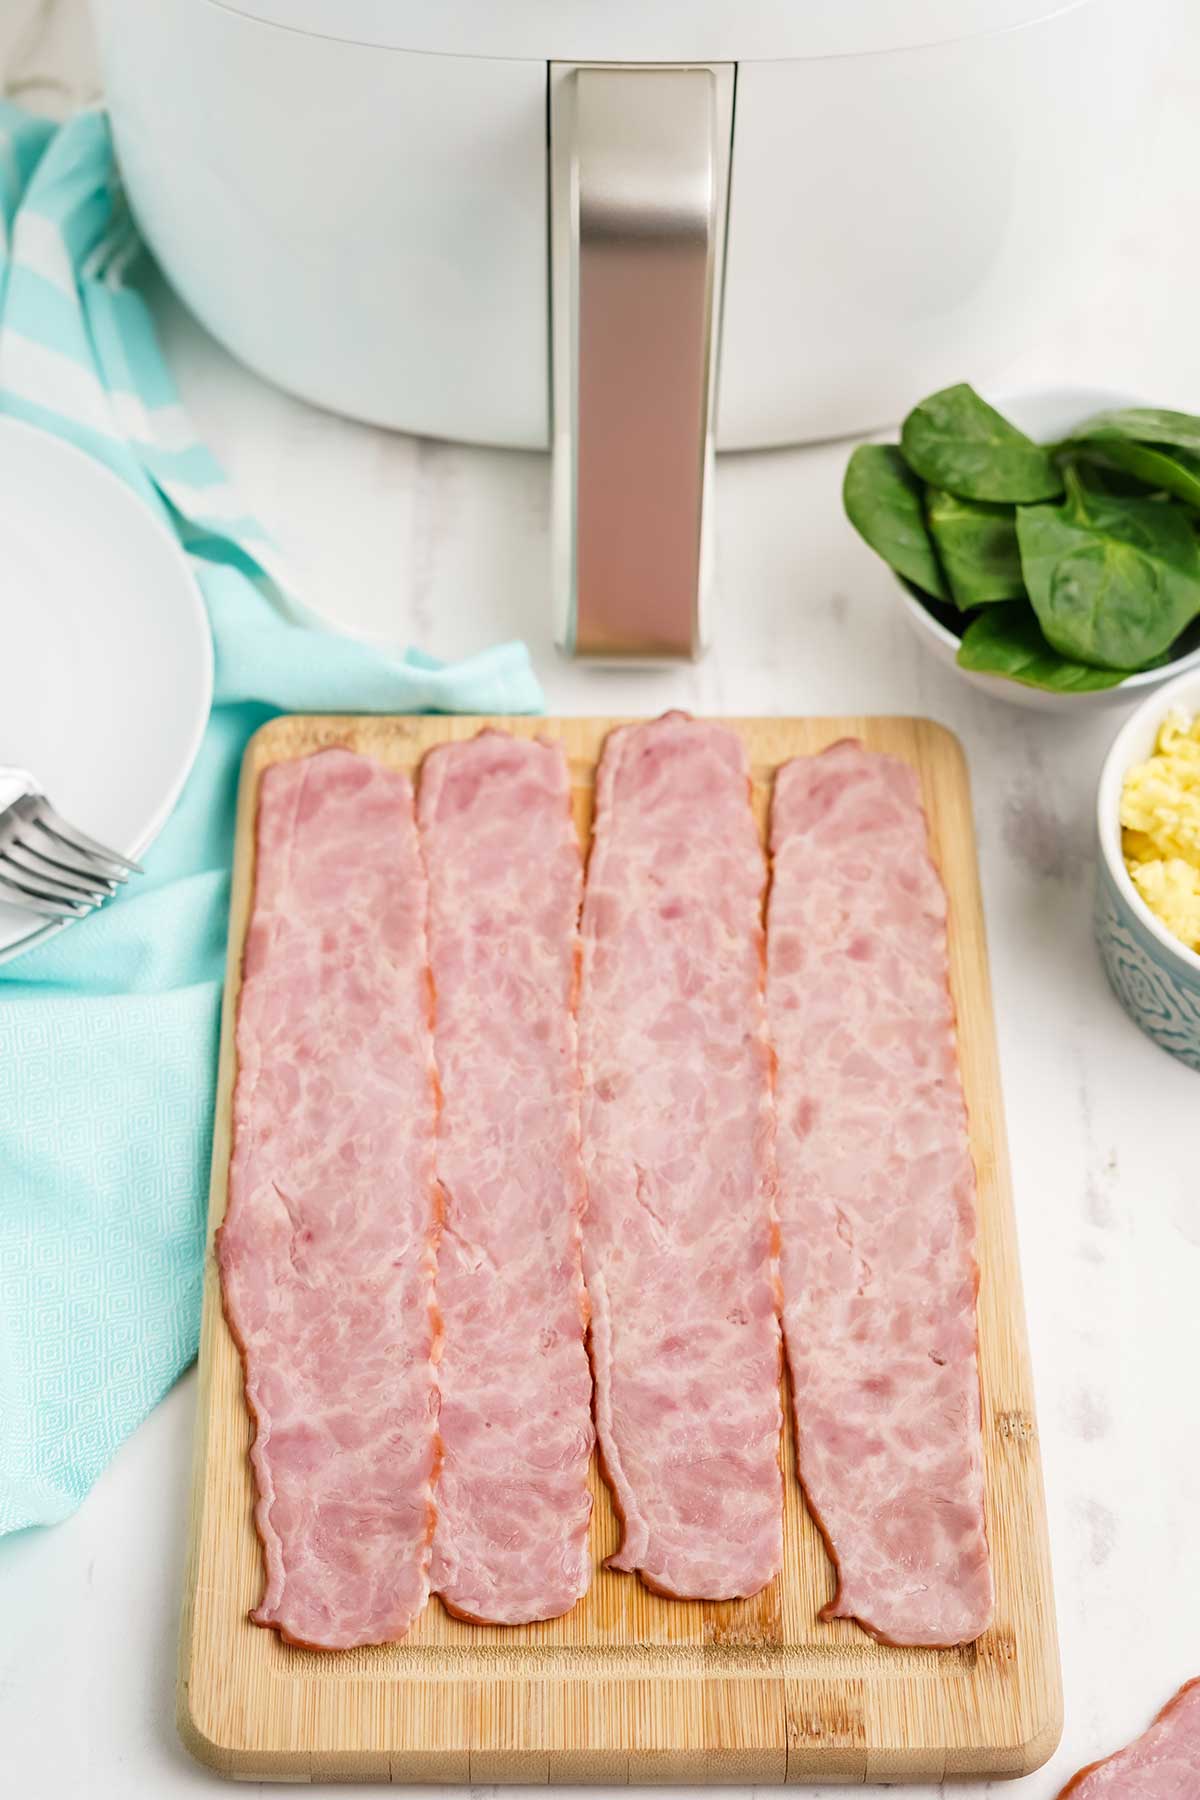 Ingredients and equipment to make air fryer turkey bacon.